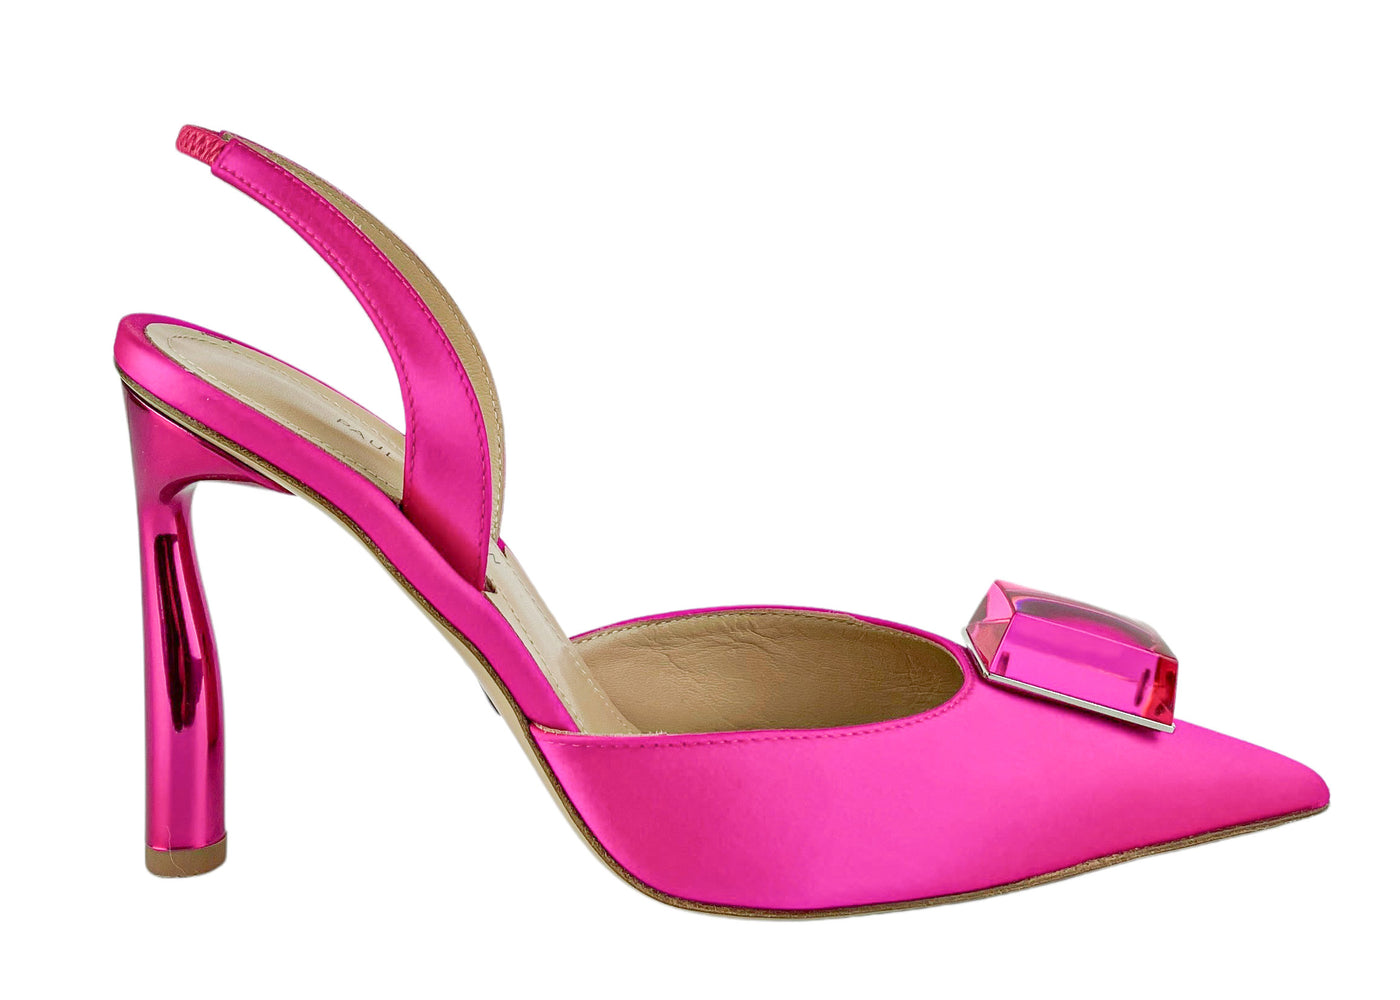 Paul Andrew Pointy Cube Slingback Heels in Fuchsia - Discounts on Paul Andrew at UAL